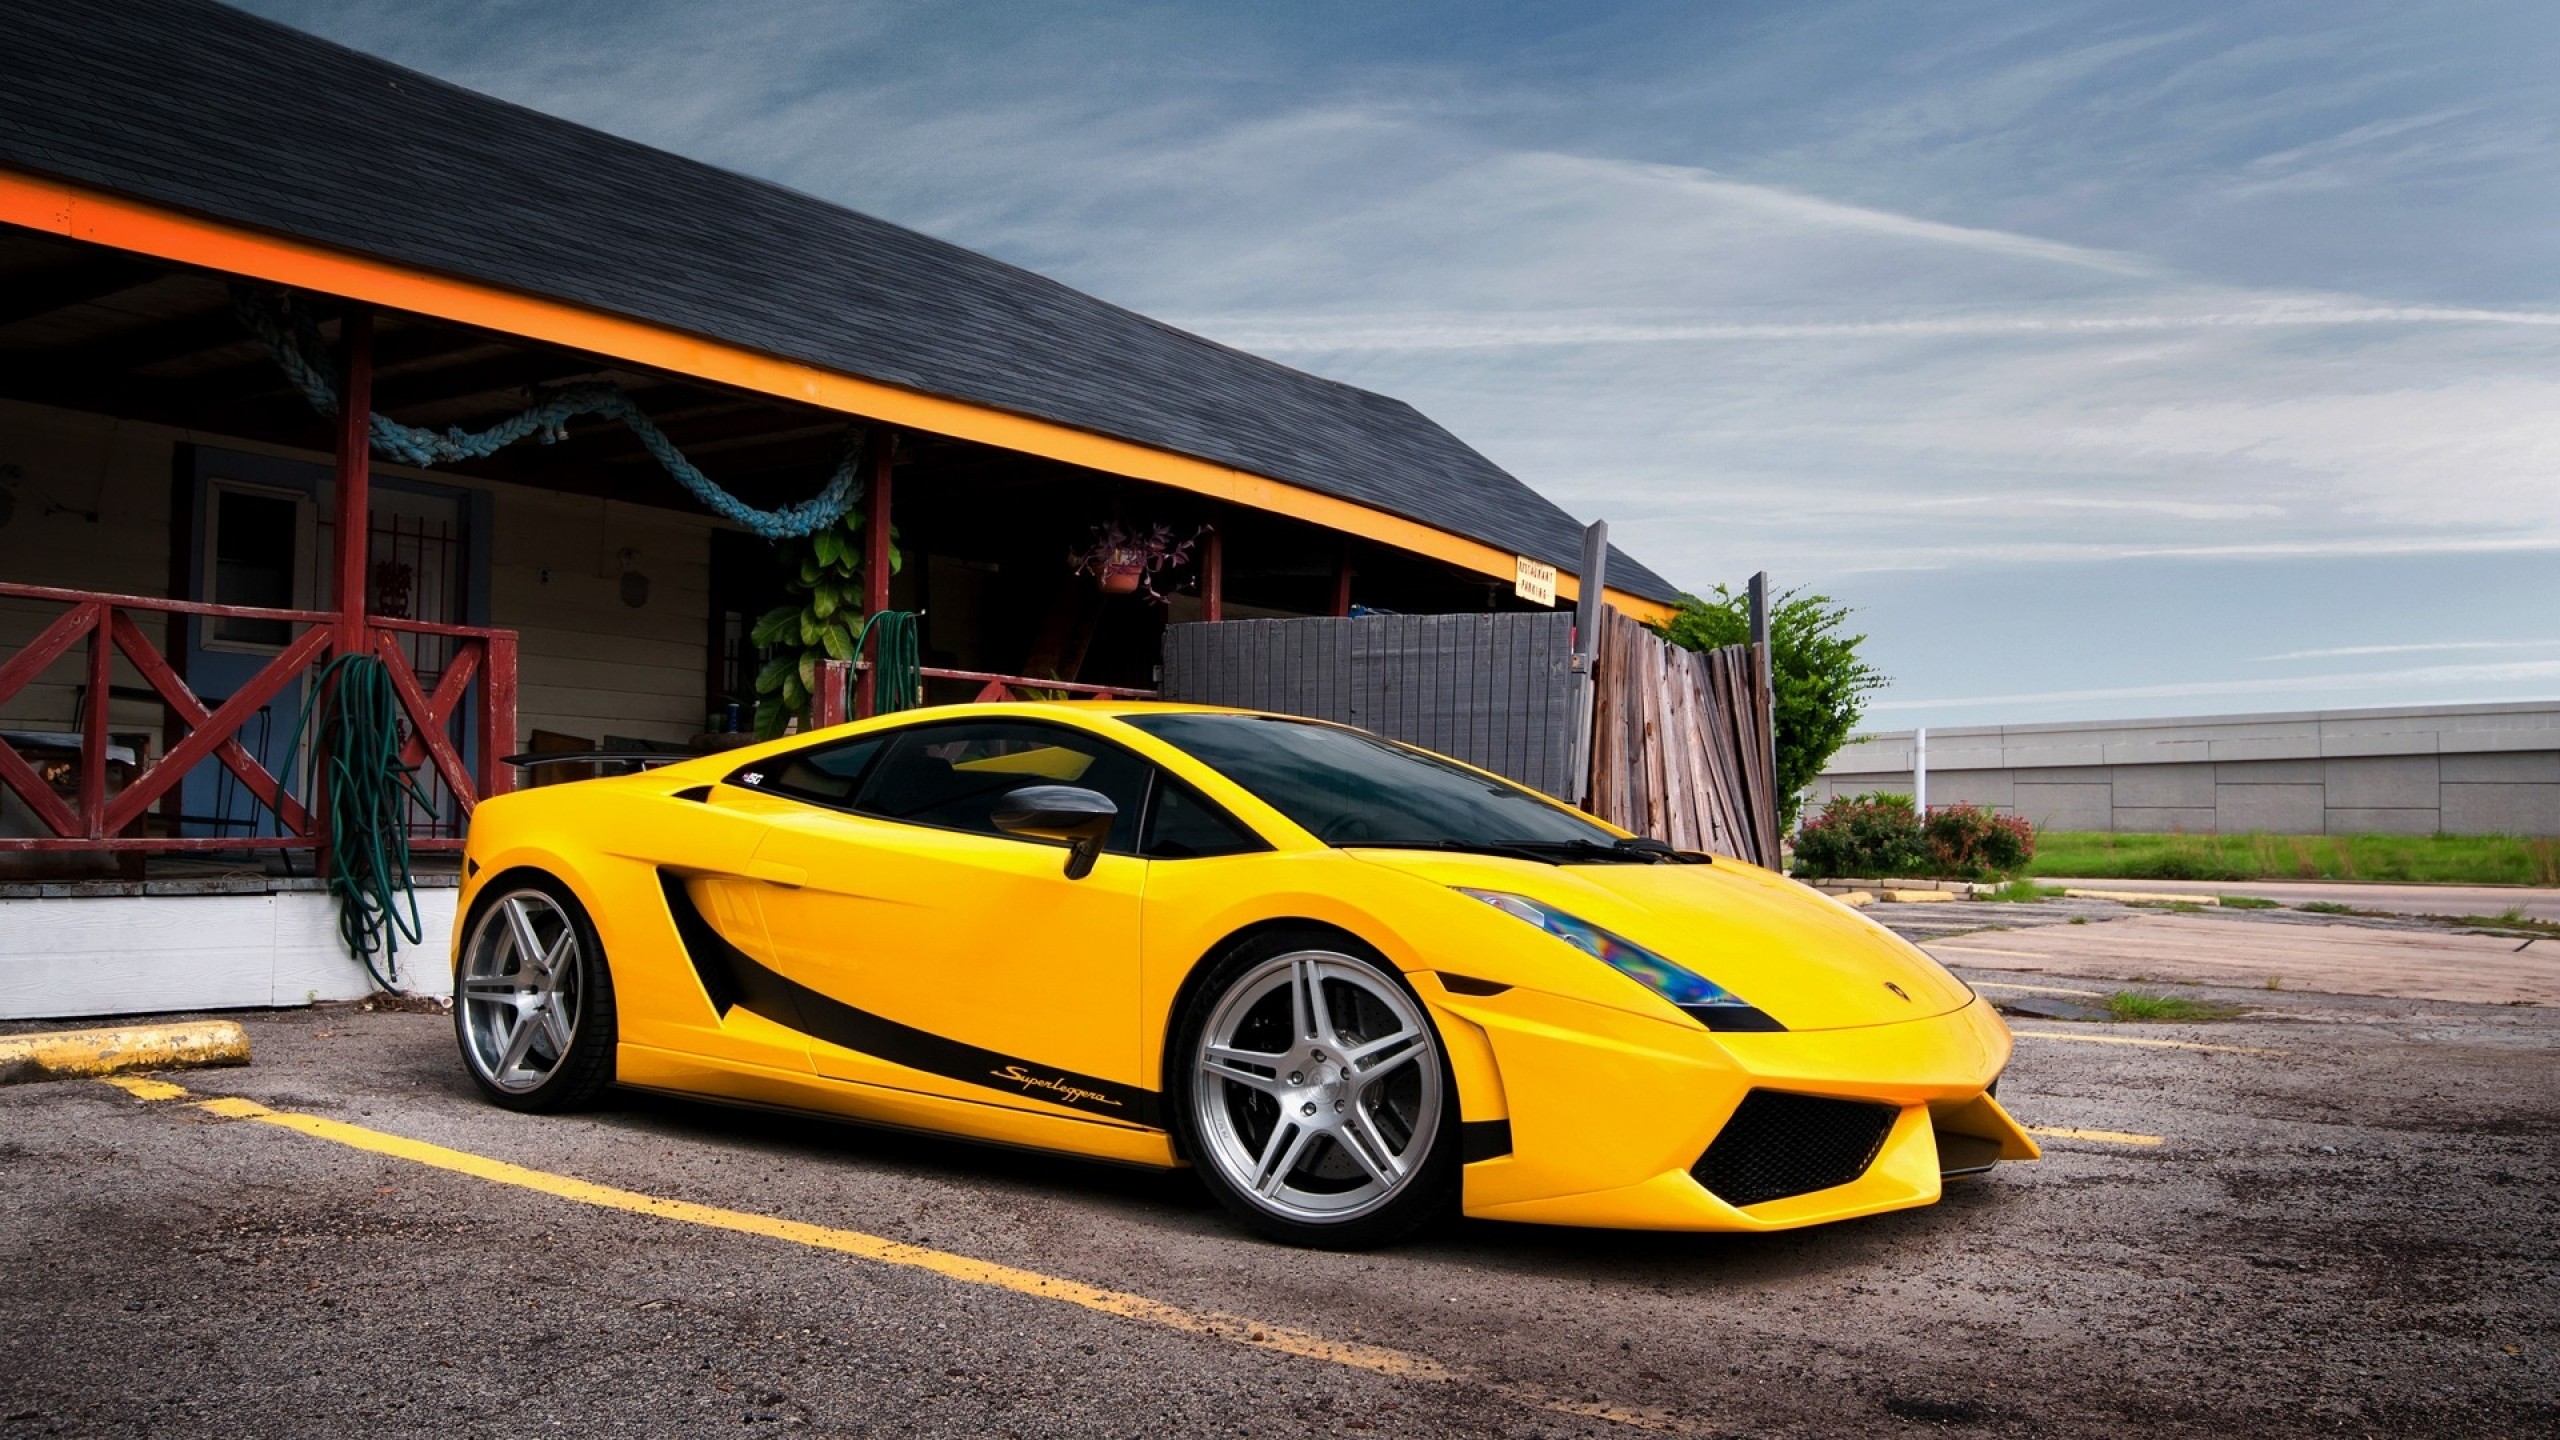 Wallpaper Yellow Lamborghini Aventador Parked Near Brown Wooden Building  During Daytime, Background - Download Free Image